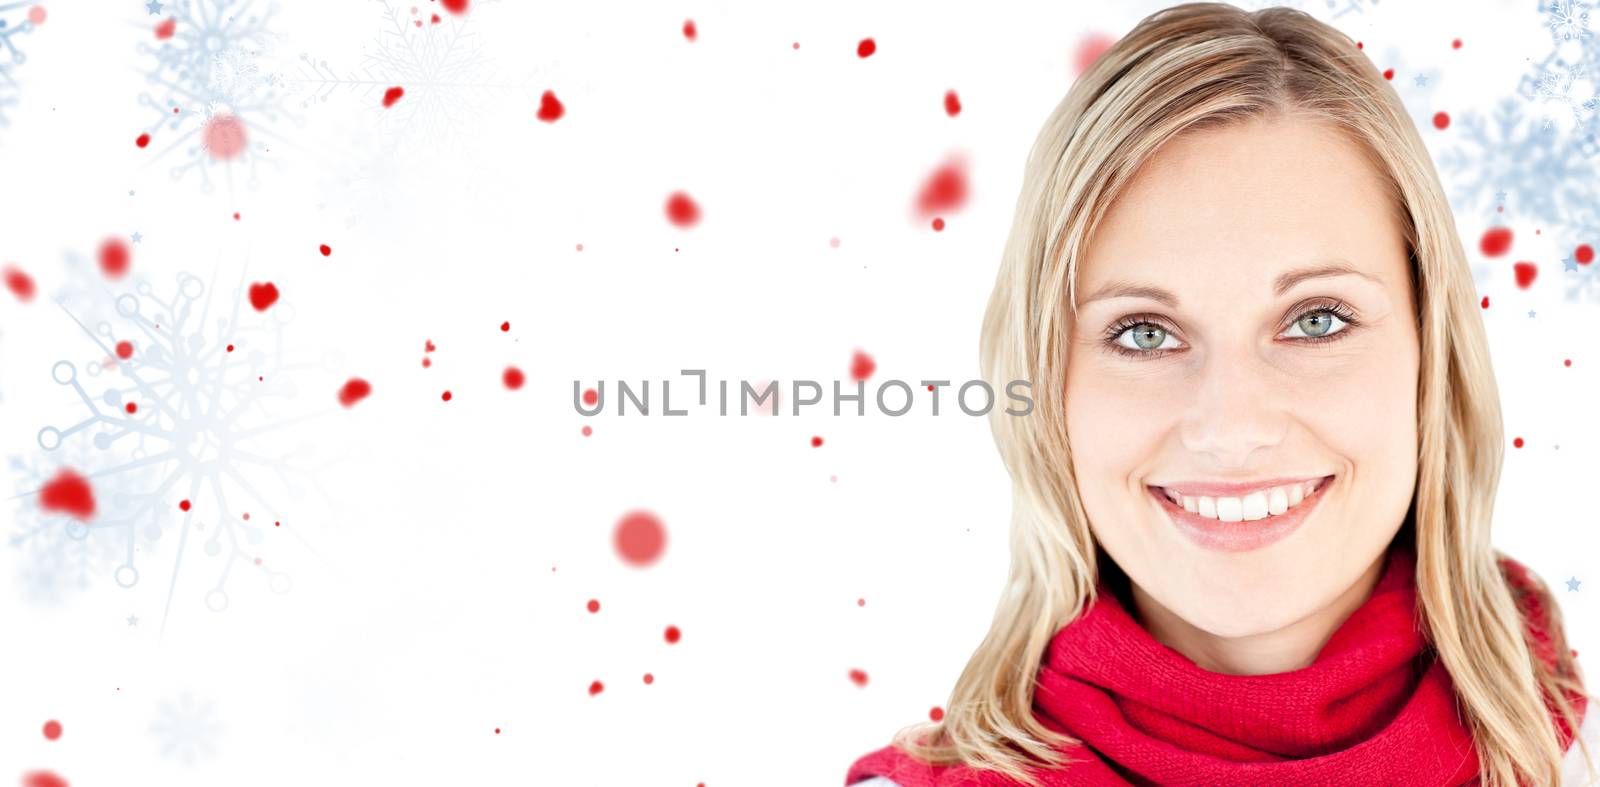 Composite image of portrait of a beautiful woman with a red scarf smiling at the camera by Wavebreakmedia